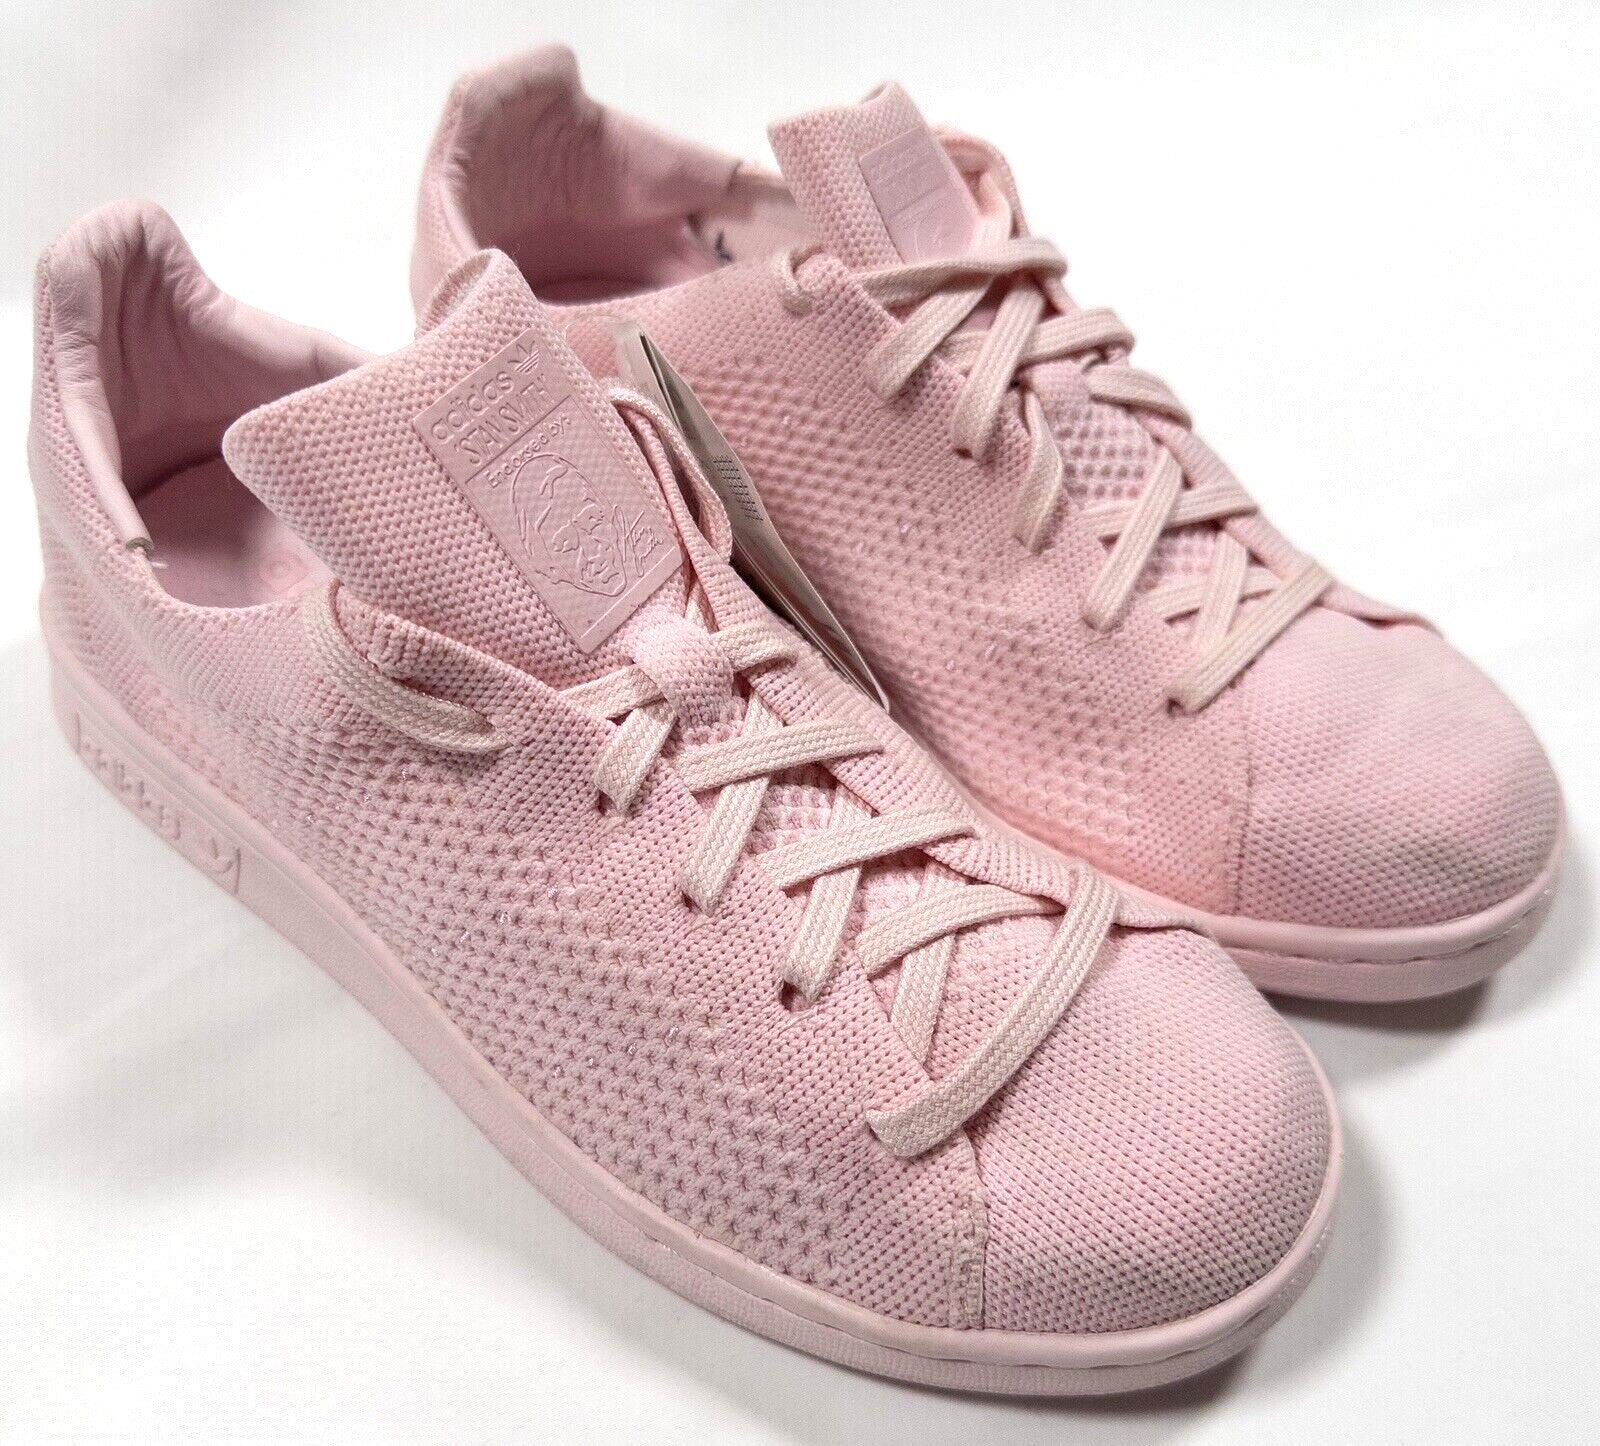 Adidas Stan Smith Limited Edition Pink Women's Trainers Shoes Size UK 5